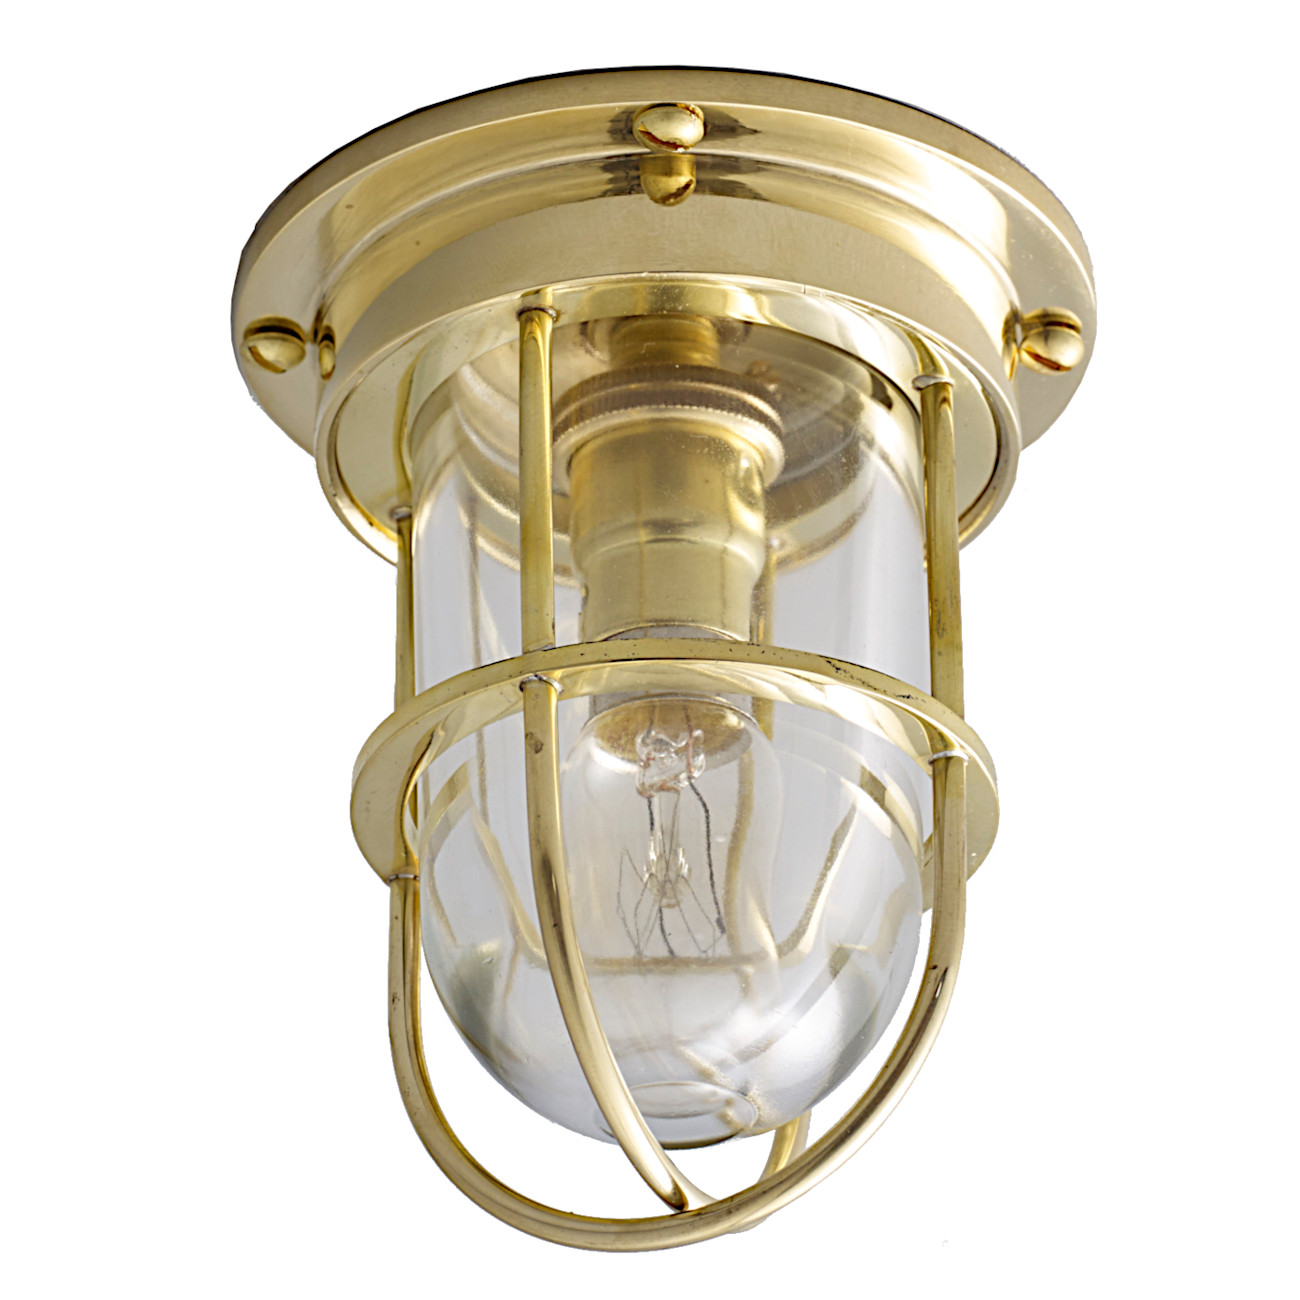 Miniature Yacht Companionway Ceiling Light with Guard 7203